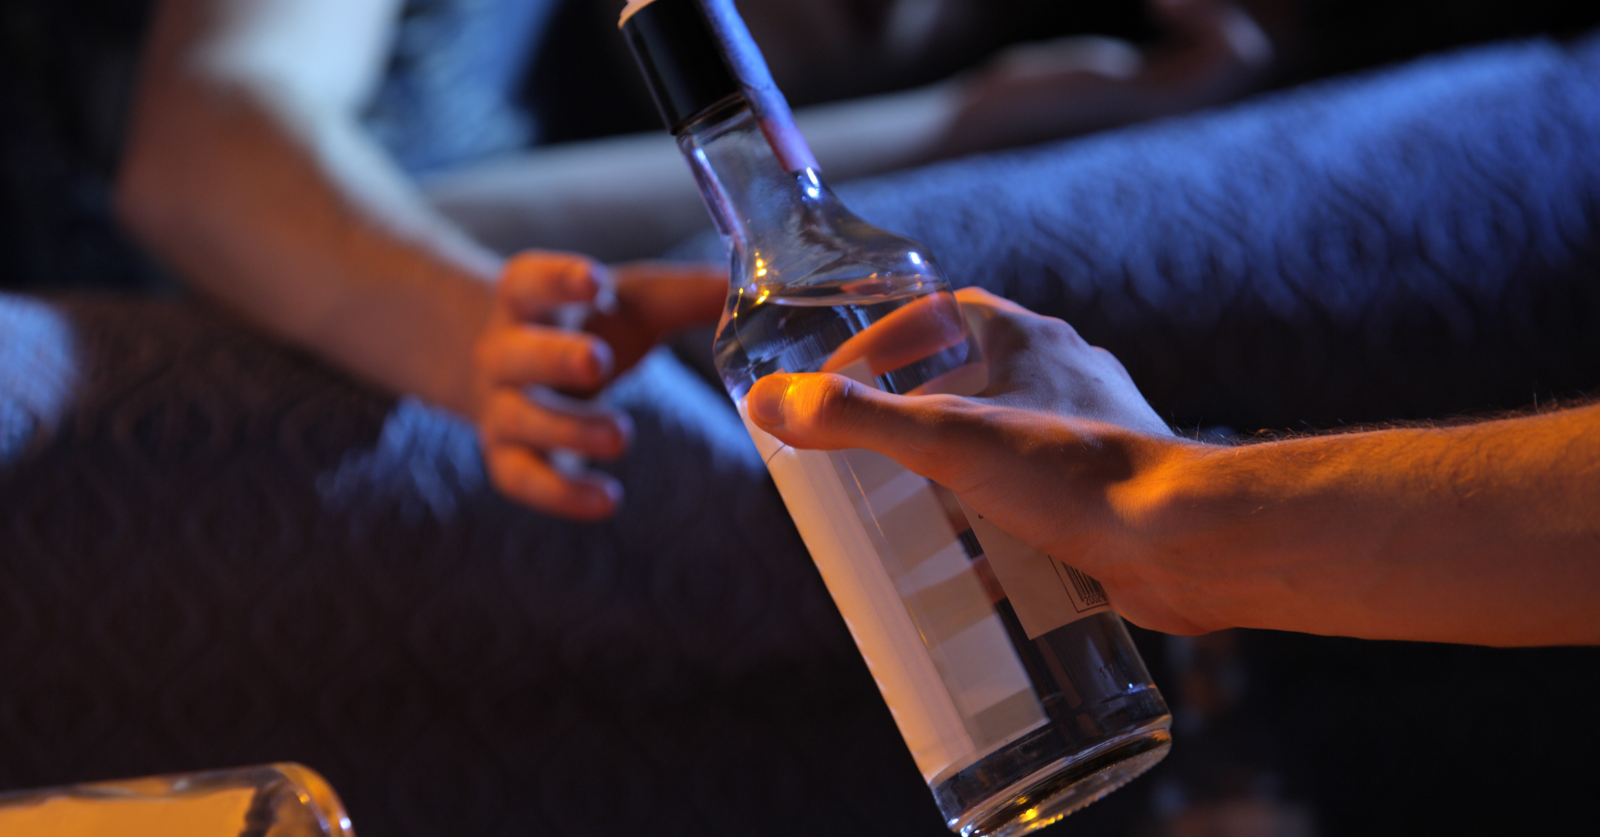 New research finds parents’ alcohol consumption influences teen drinking habits